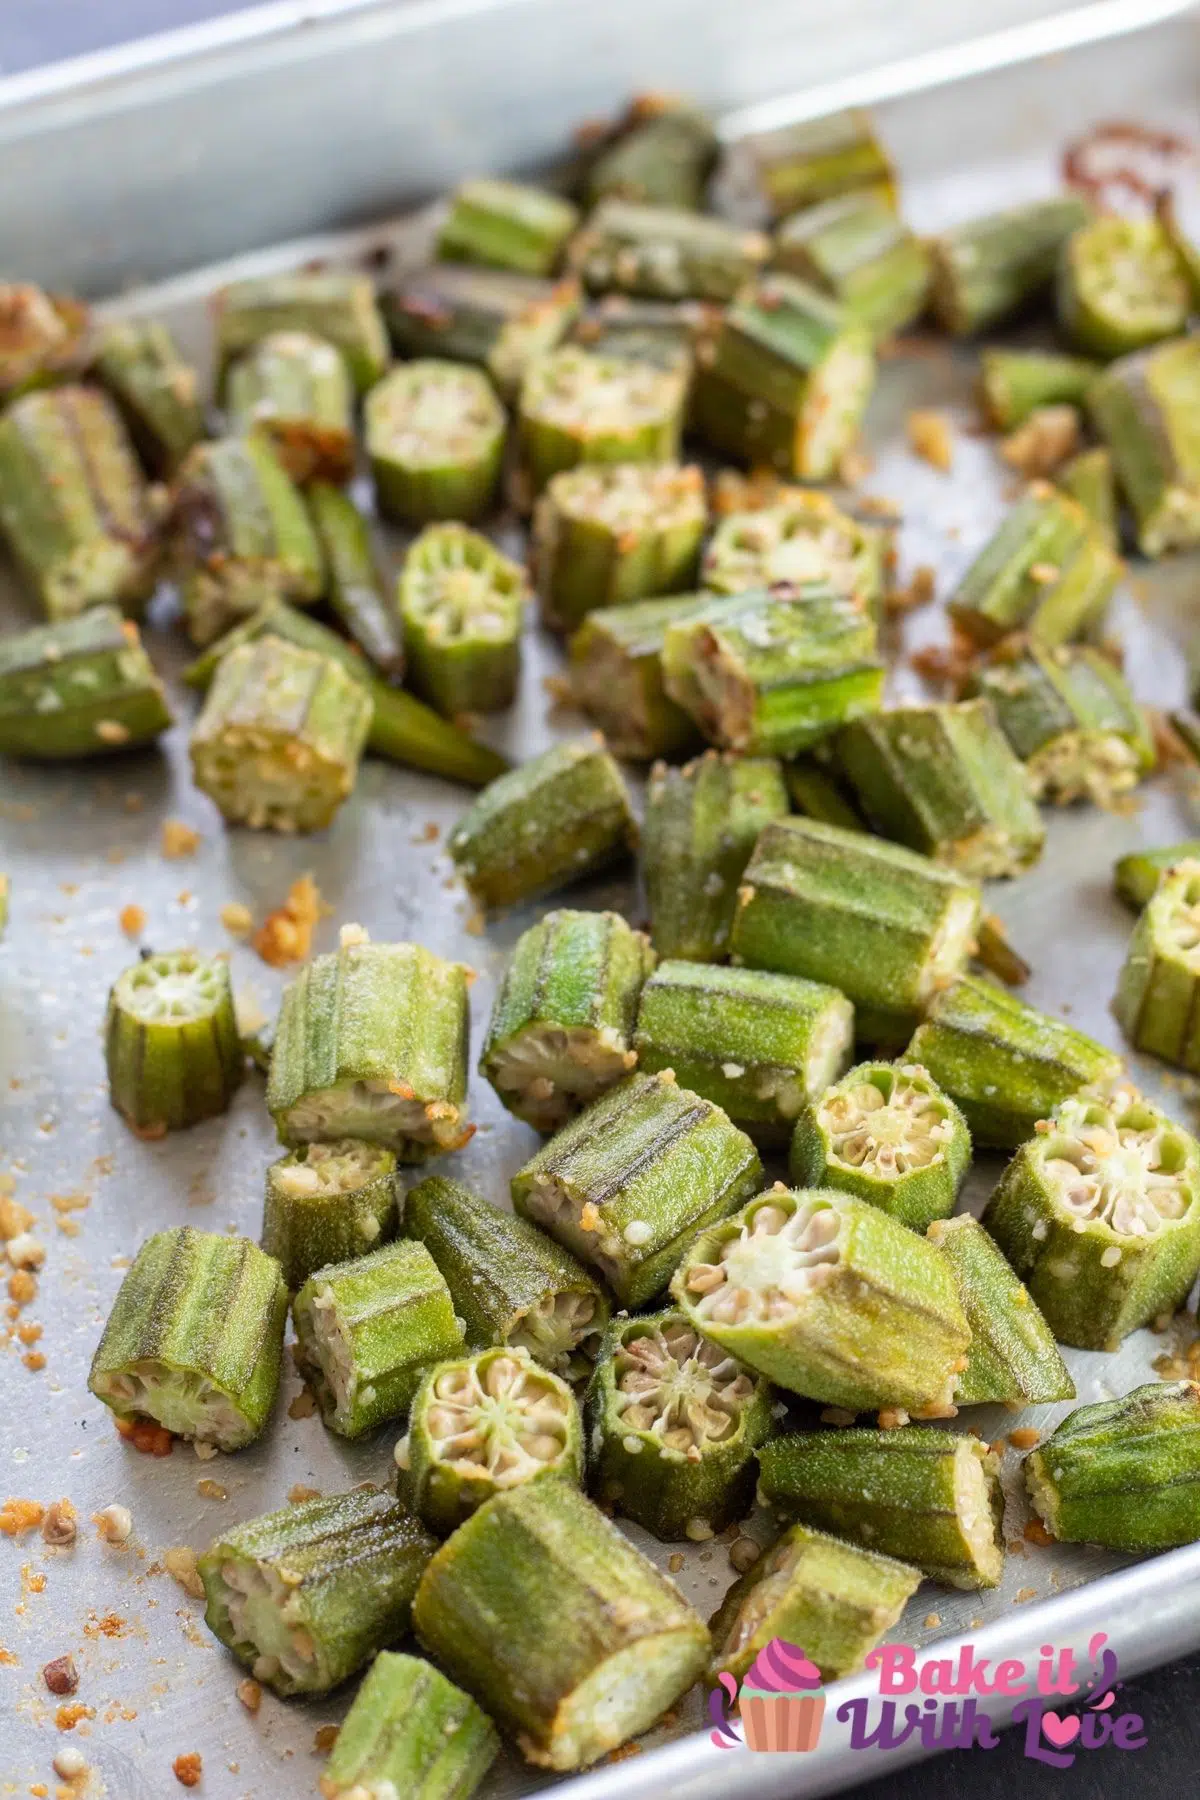 Tall section of the roasted okra on rimmed baking sheet.